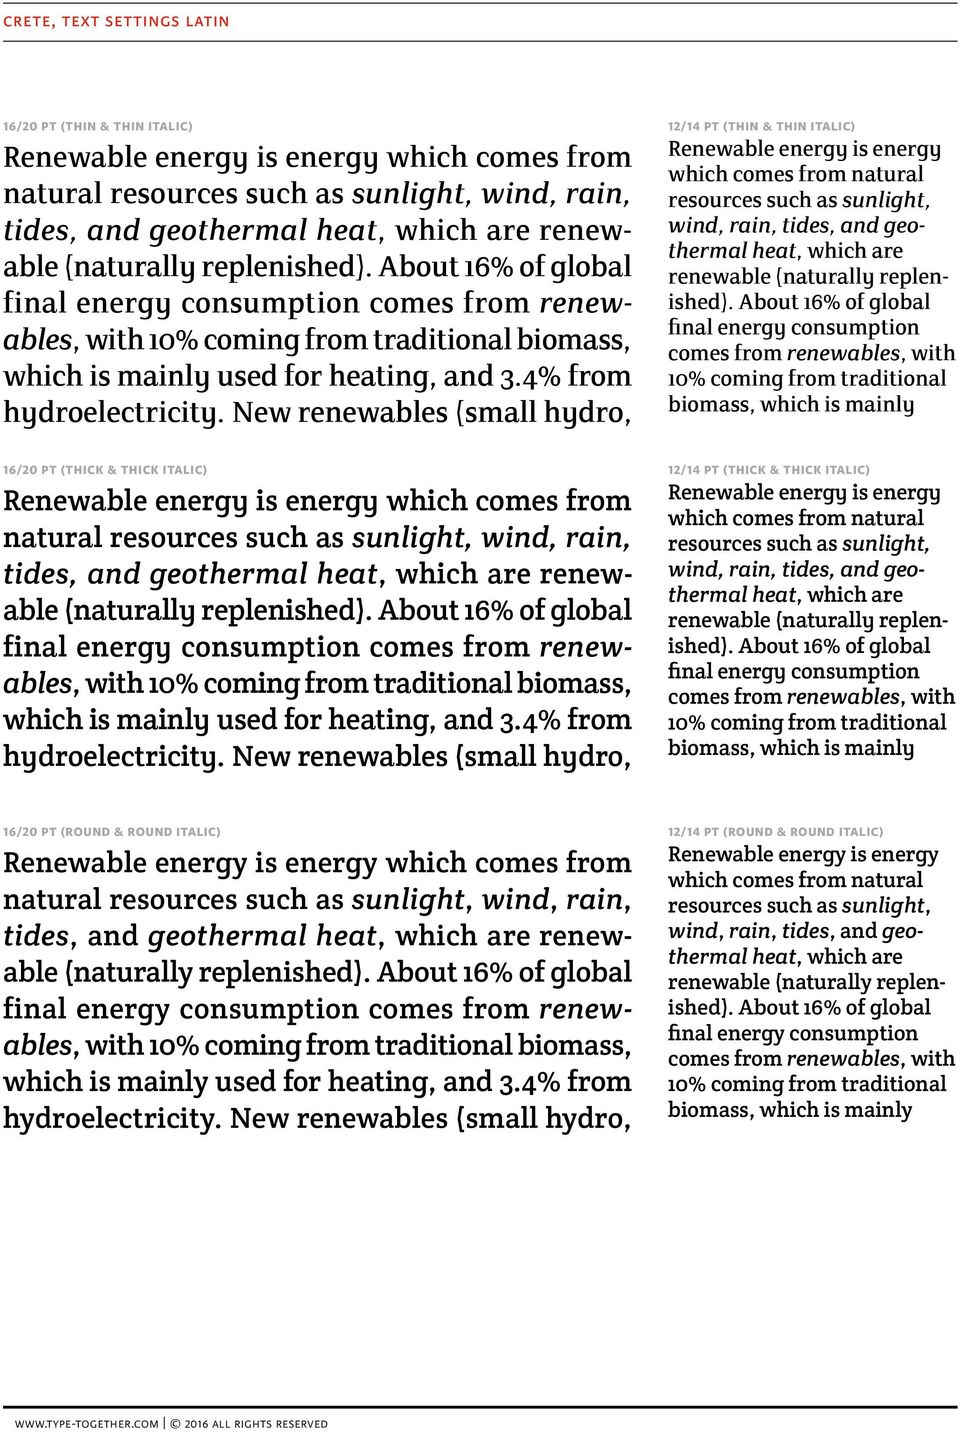 New renewables (small hydro, 16/20 pt (thick & thick italic) Renewable energy is energy which comes from natural resources such as sunlight, wind, rain, tides, and geothermal heat, which are renew